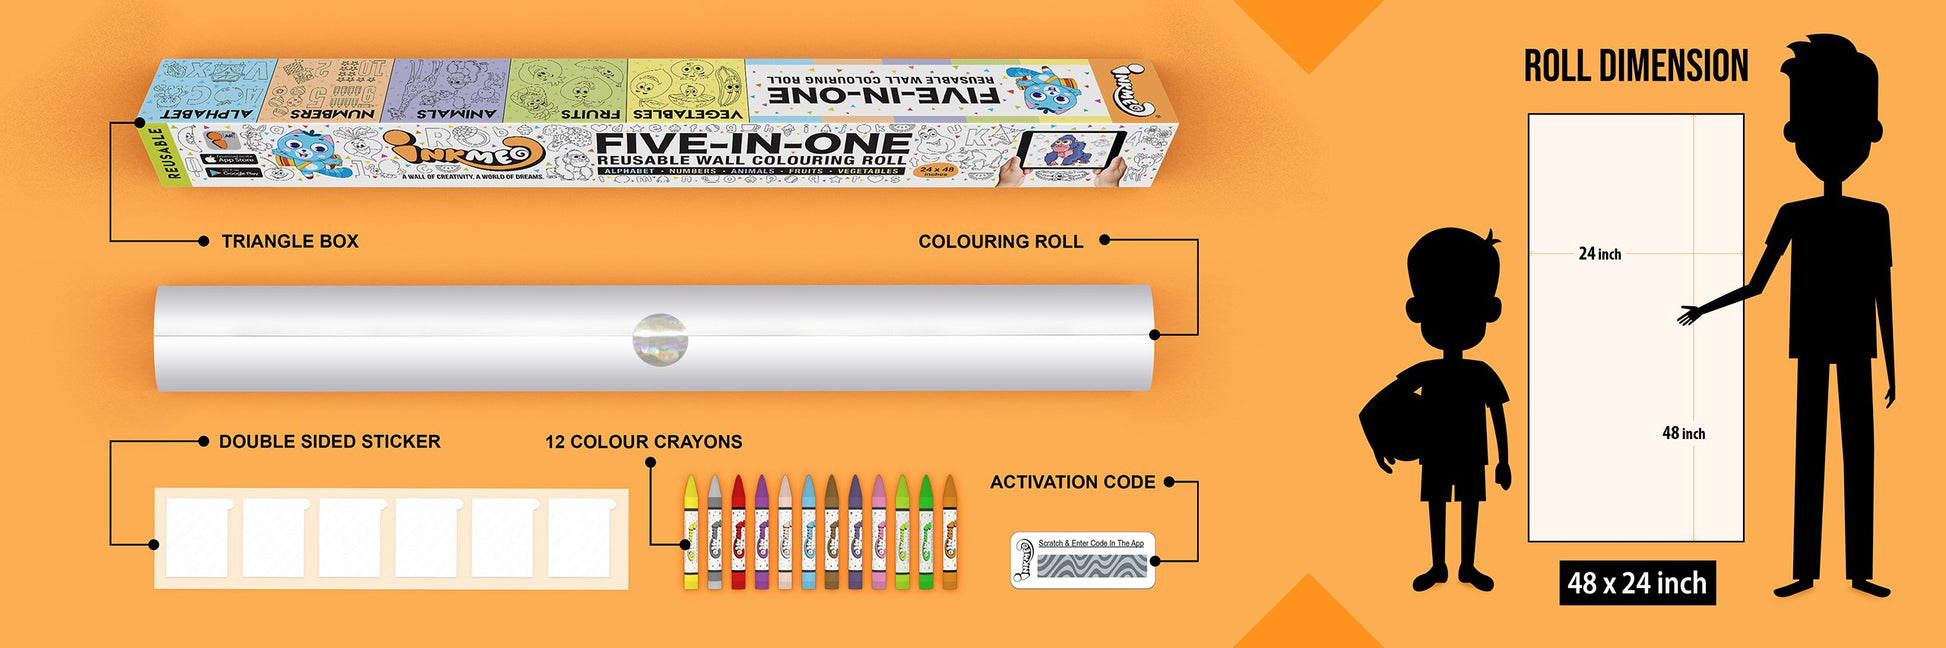 The image illustrates a lavender background with Triangle box, colouring roll, 6 double tape, 12 colour crayons and activation code. and next to that the roll dimention is mentioned as 24*48 inches in size with child ad adult height reference